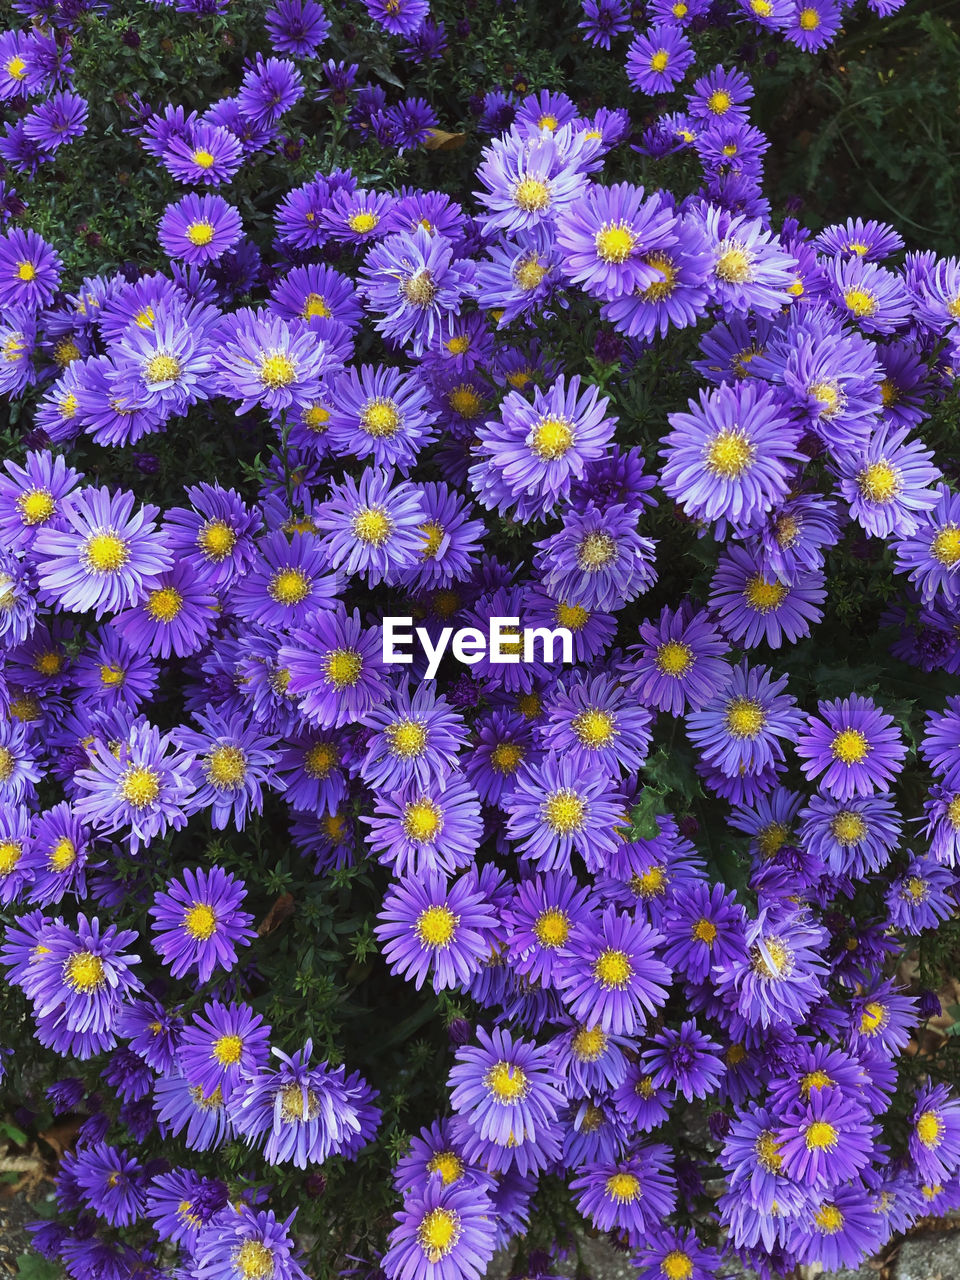 flower, flowering plant, plant, freshness, fragility, beauty in nature, growth, aster, petal, flower head, inflorescence, close-up, no people, nature, high angle view, day, field, wildflower, purple, full frame, land, botany, outdoors, backgrounds